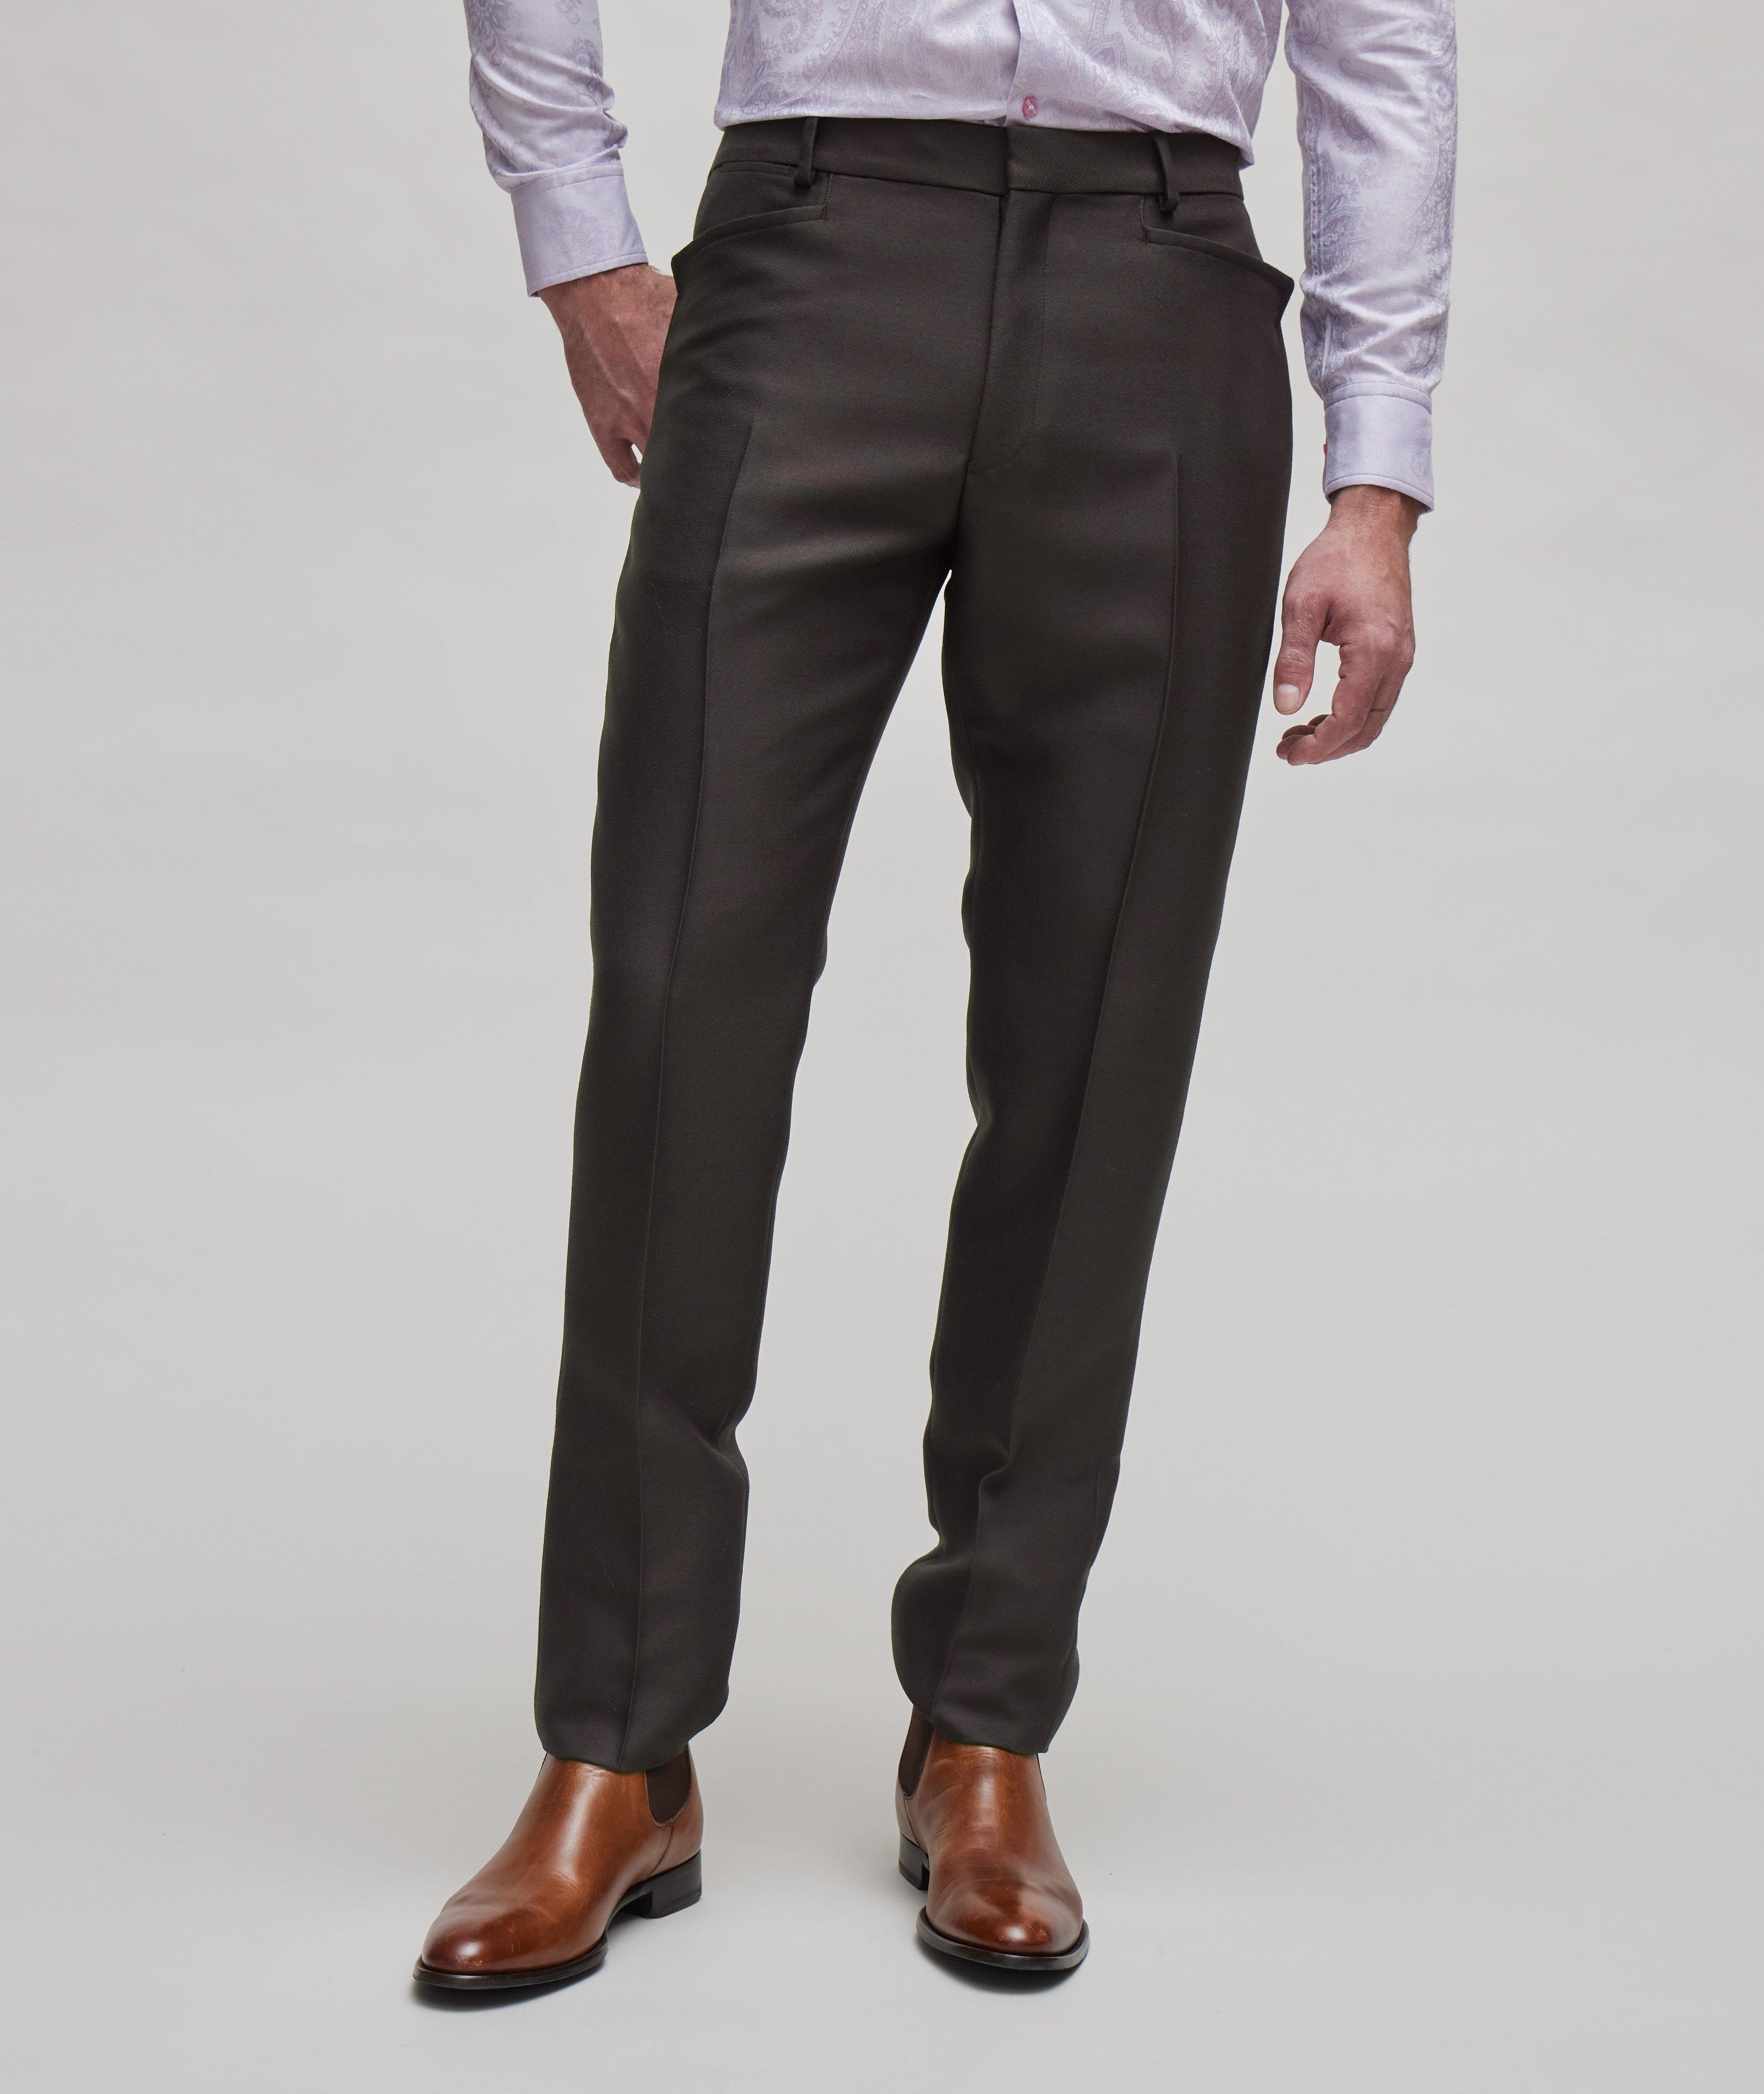 Atticus Western Style Five-Pocket Pants  image 1